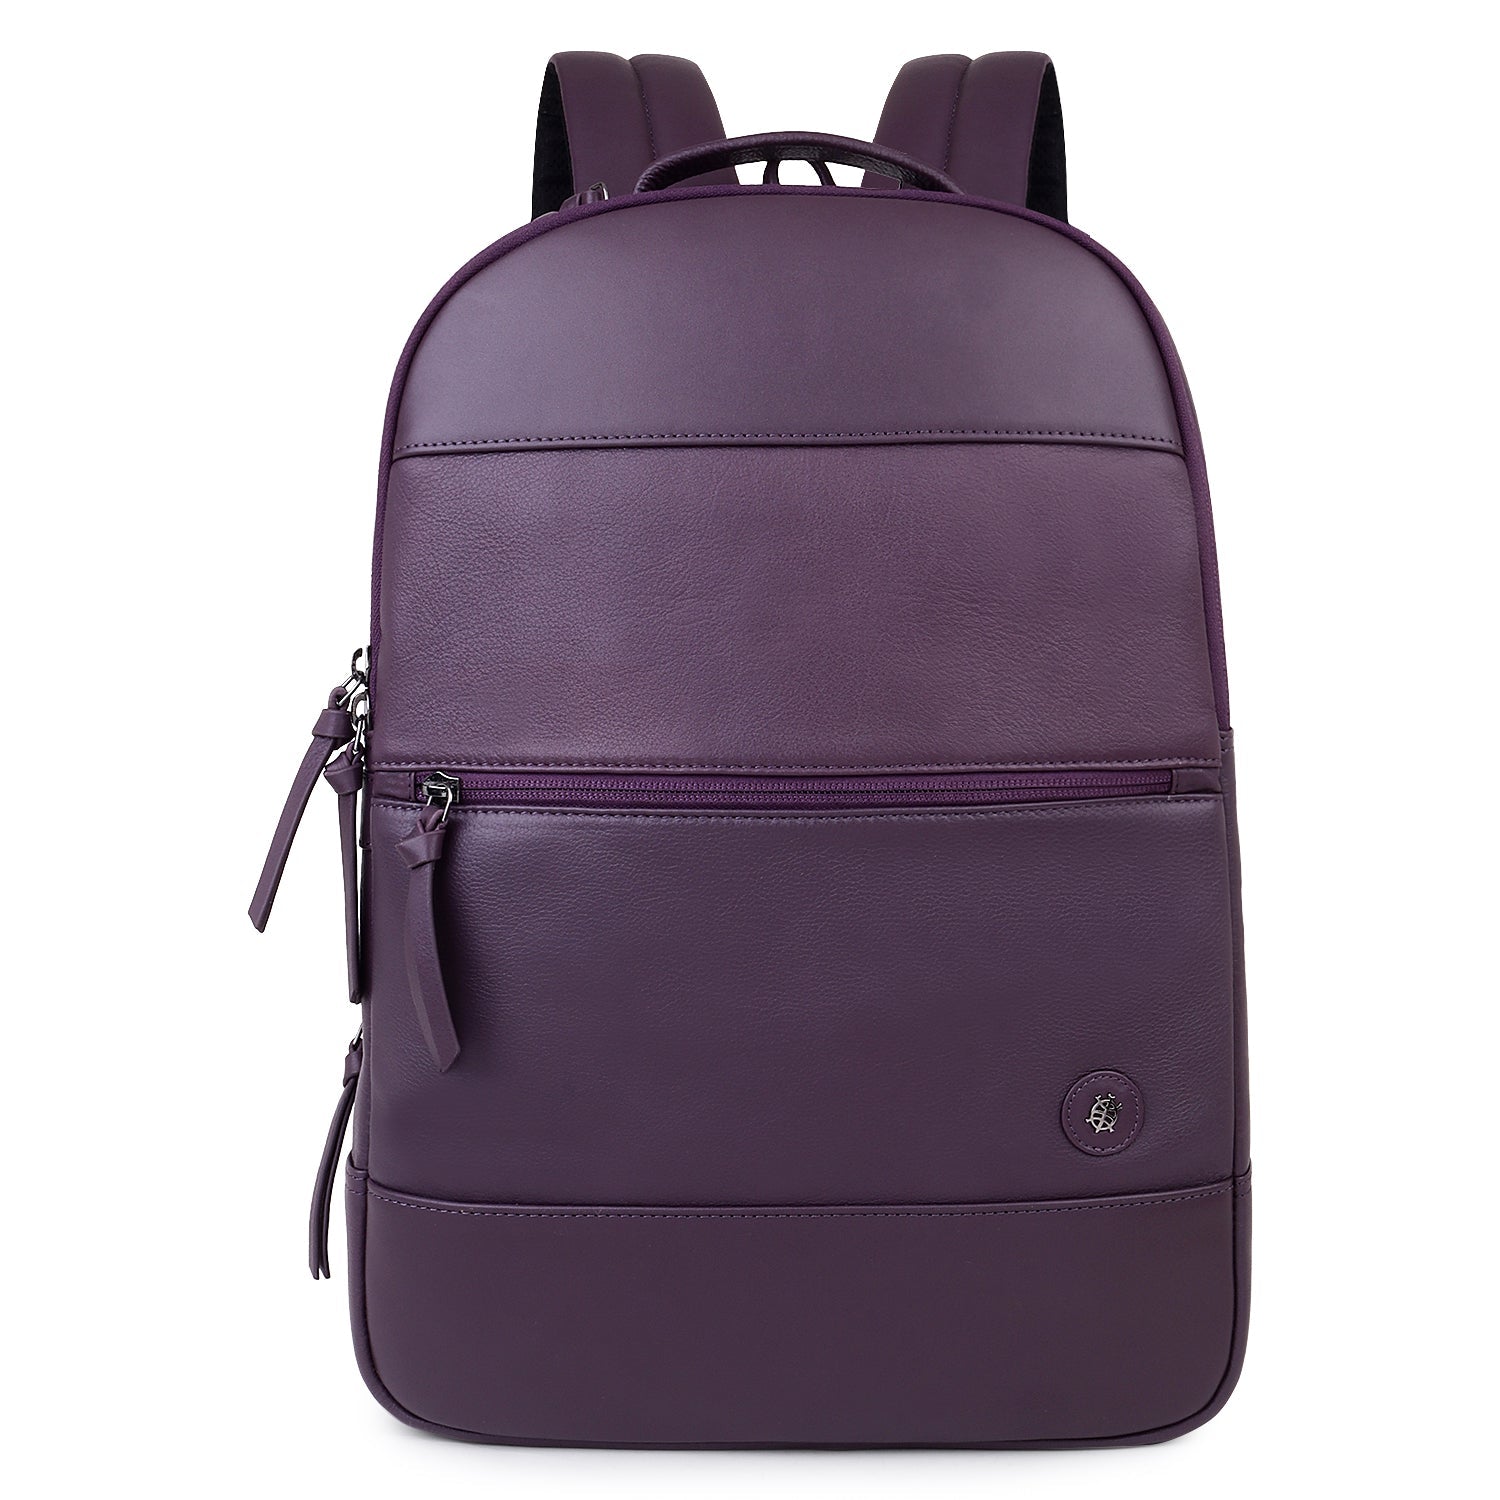 PU Leather Backpack Purse | The Store Bags